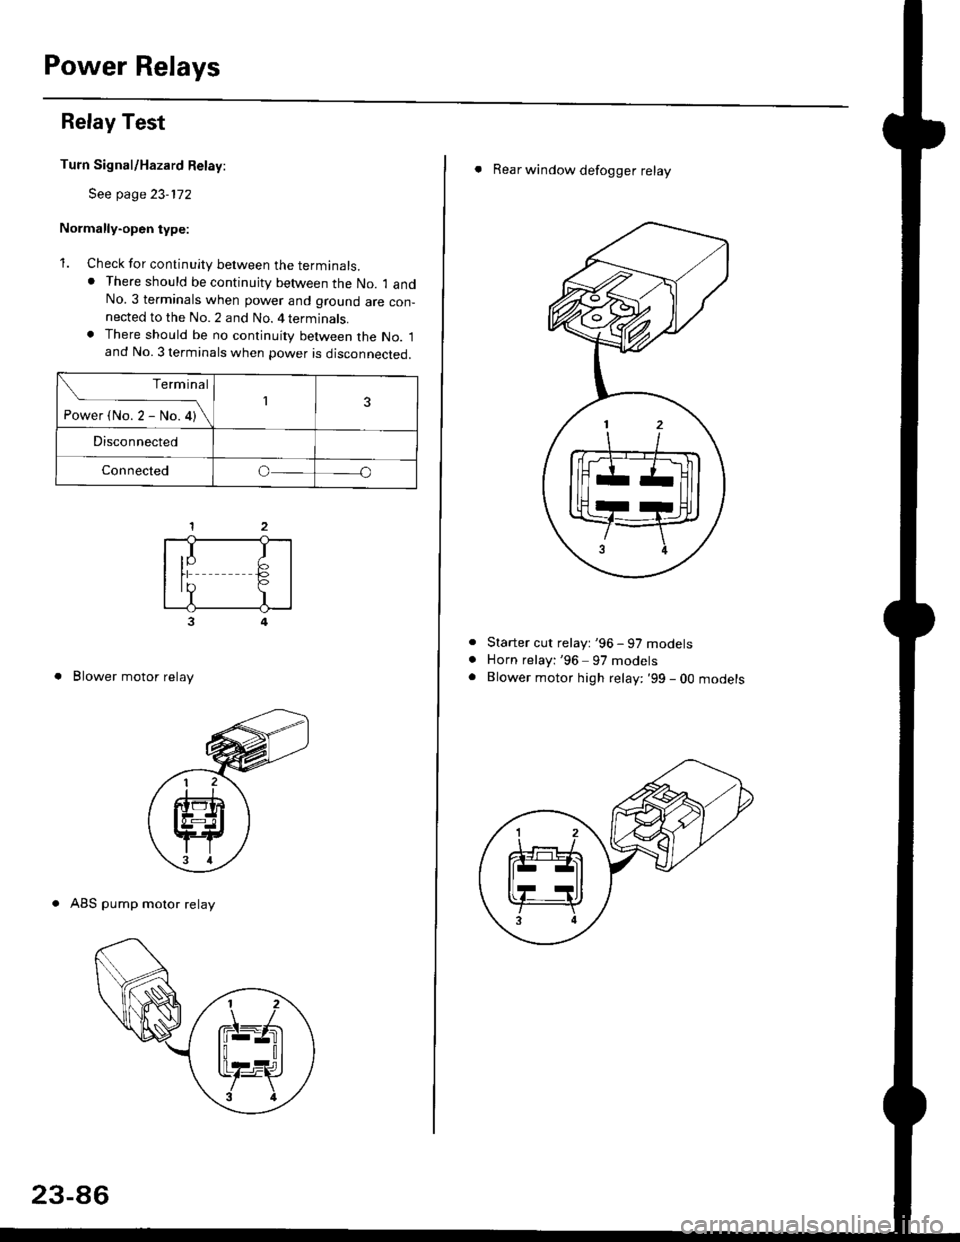 HONDA CIVIC 1996 6.G Owners Manual Power Relays
Relay Test
Turn Signal/Hazard Relay:
See page 23-172
Normally-open type:
1. Check for continuity between the terminals.. There should be continujty between the No. 1 andNo.3 terminals whe